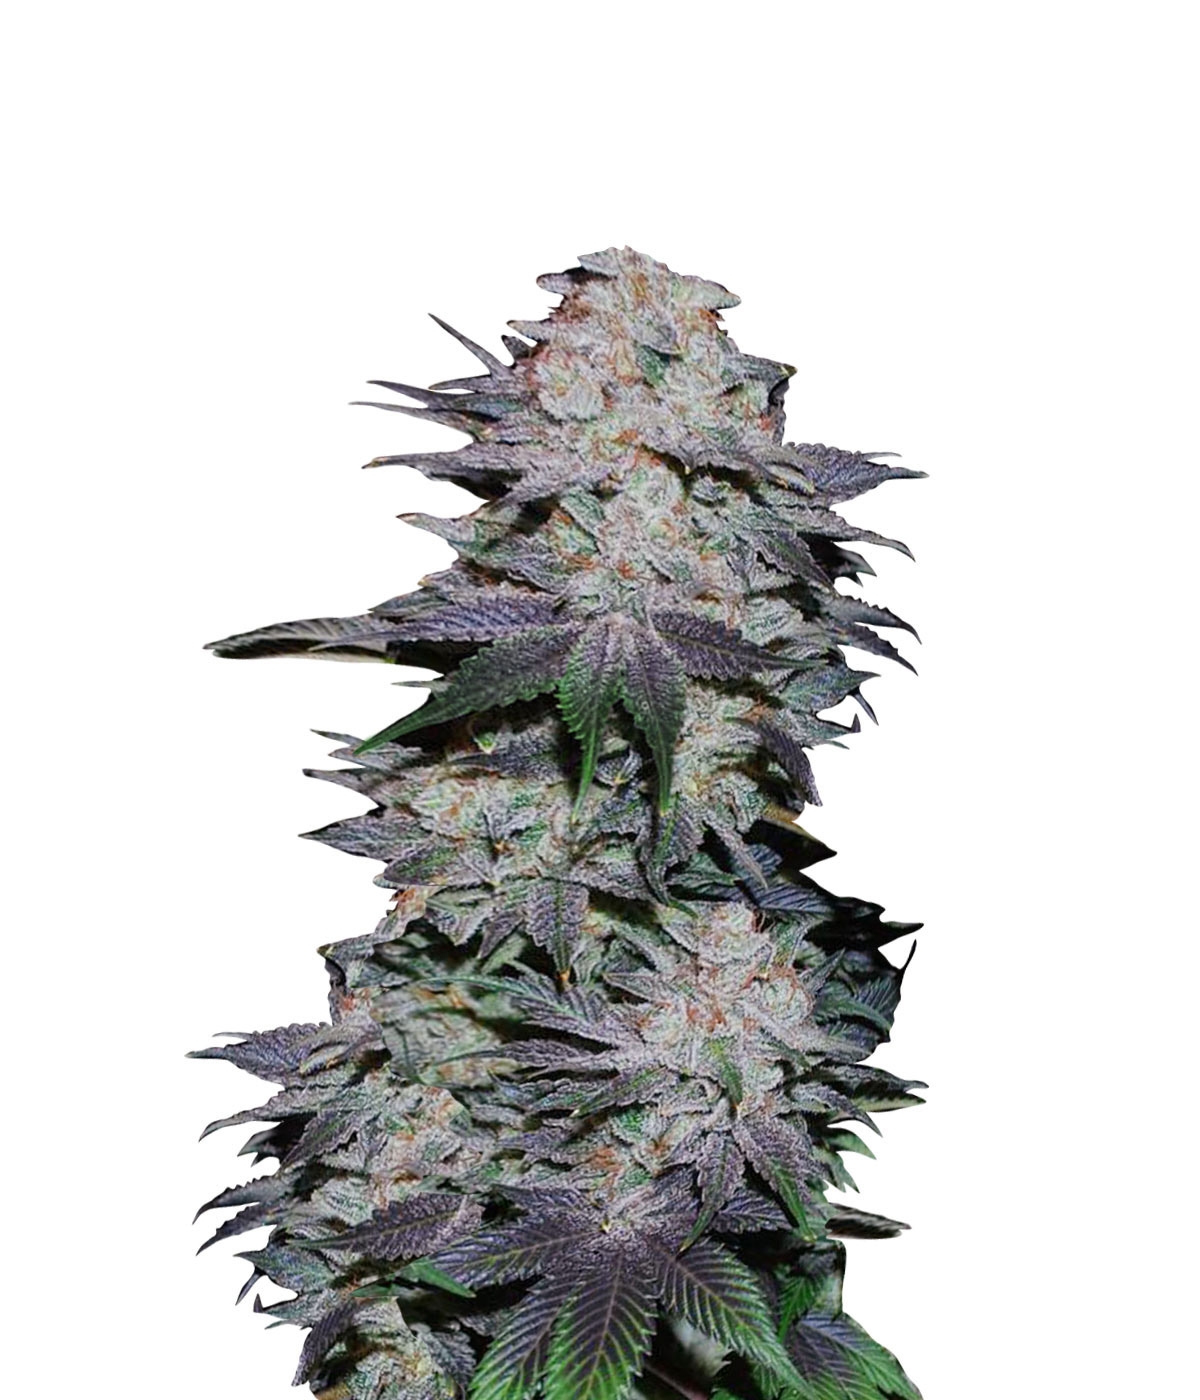 Grown by landymick-googlemail-com